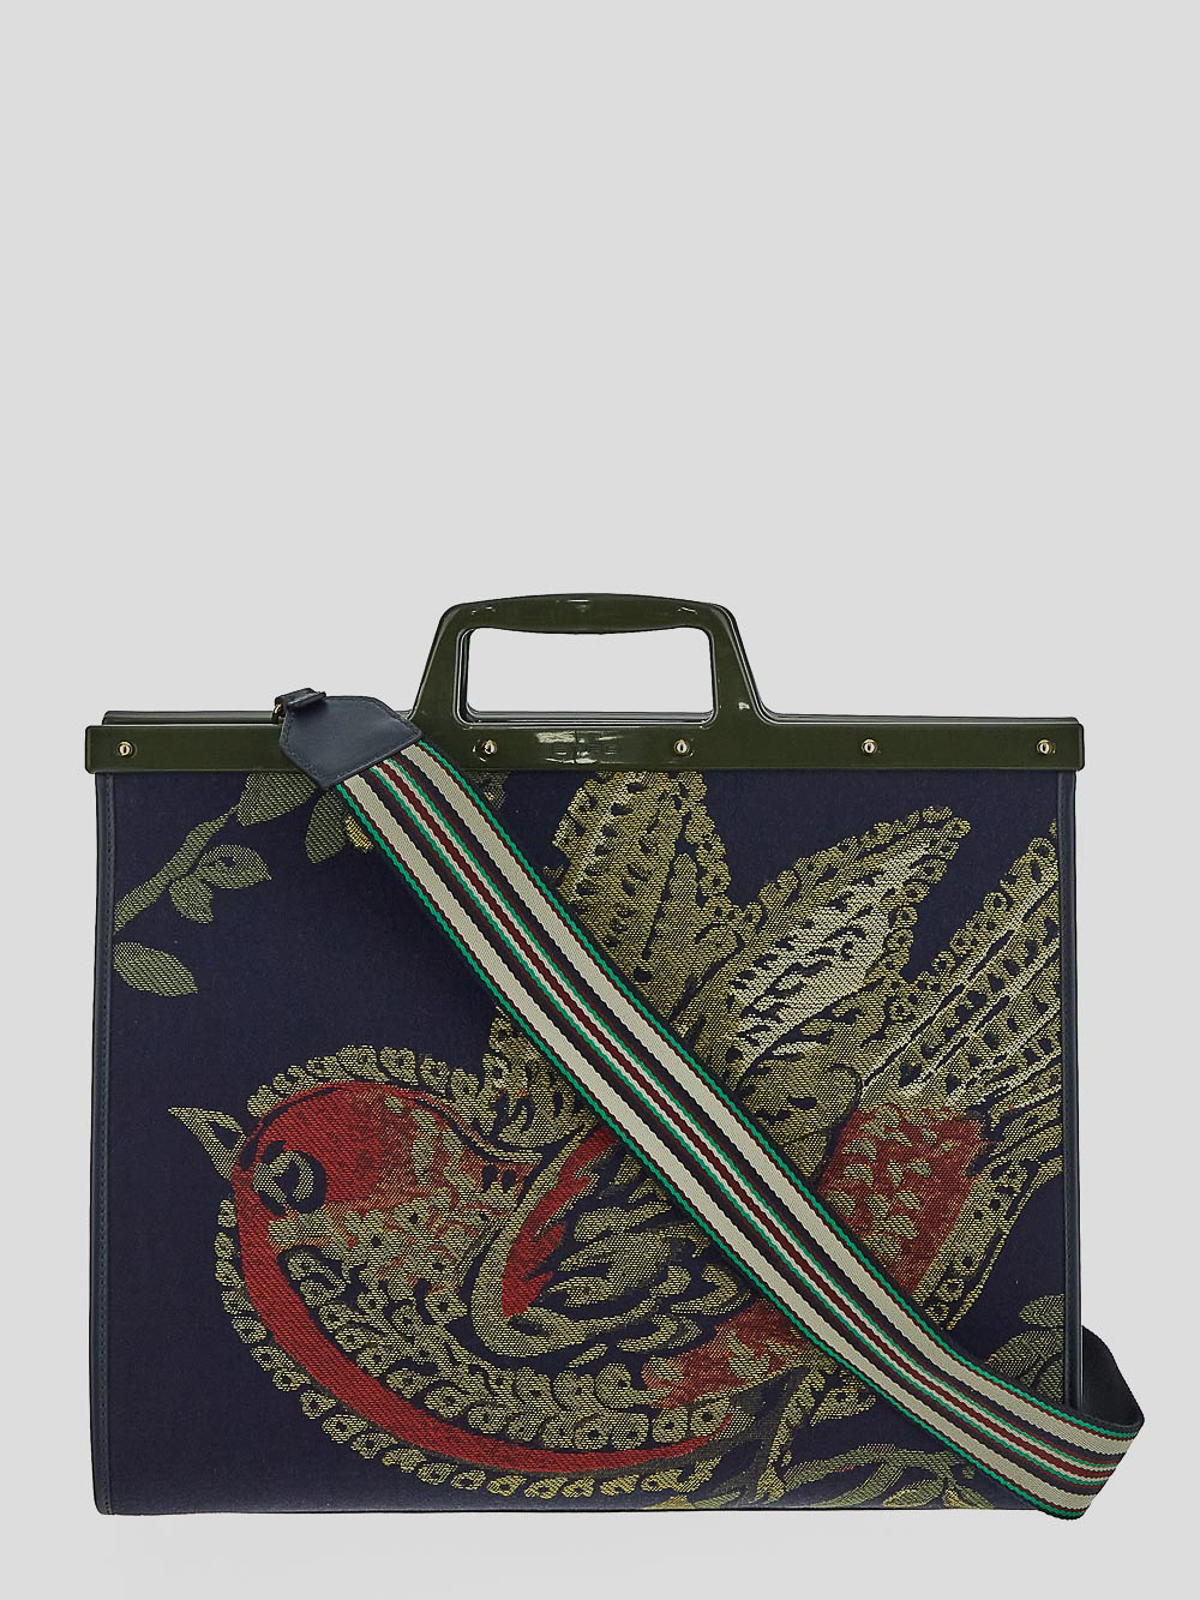 Totes bags Etro - Floral tote - 1P02475810202 | thebs.com [ikrix.com]